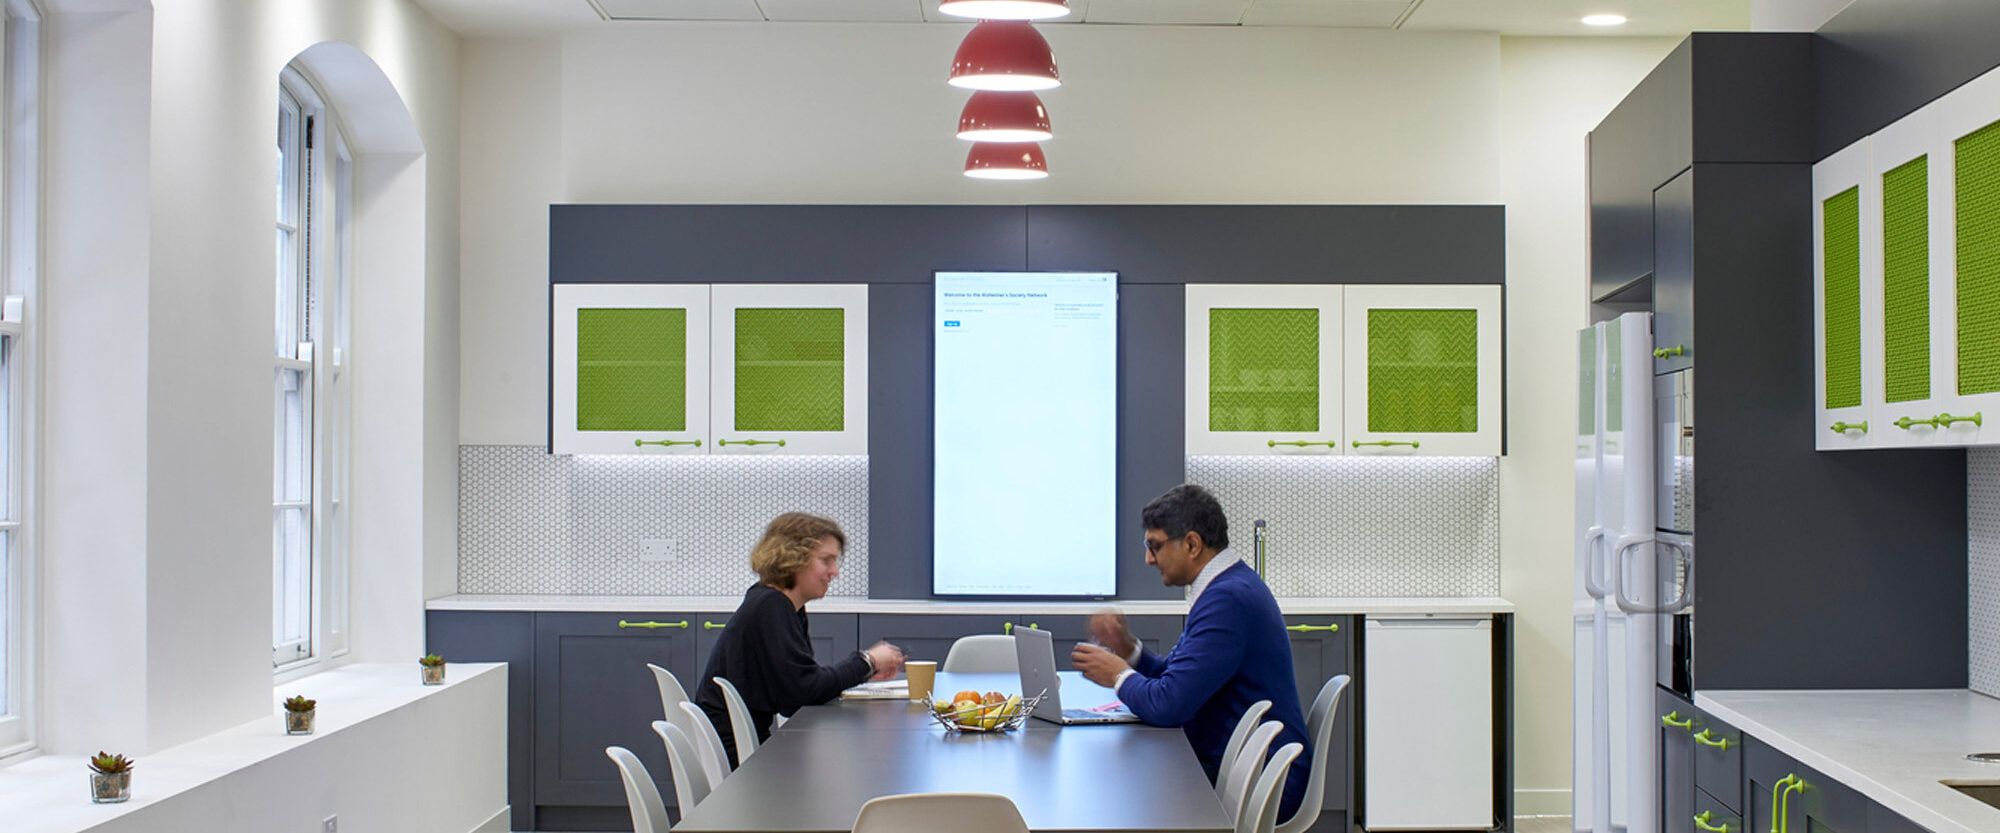 Spacious modern office kitchenette with white walls featuring green soundproofing panels. Slate grey cabinetry and appliances complement the bright red pendant lights. Two professionals engage in conversation at a sleek, central dining table with designer wire chairs.